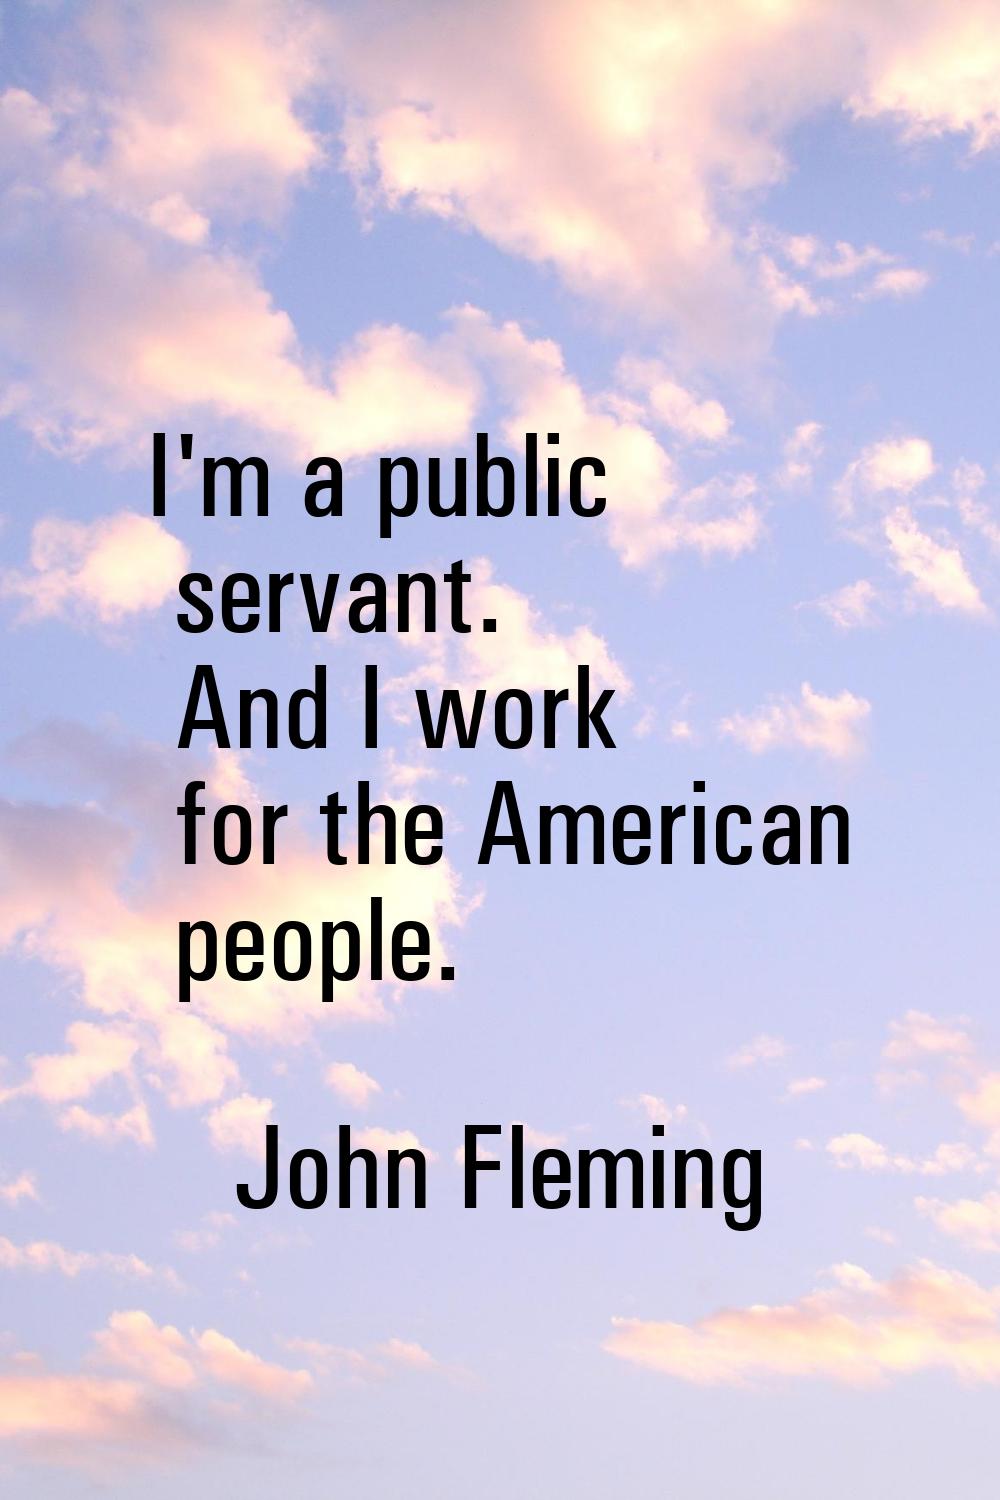 I'm a public servant. And I work for the American people.